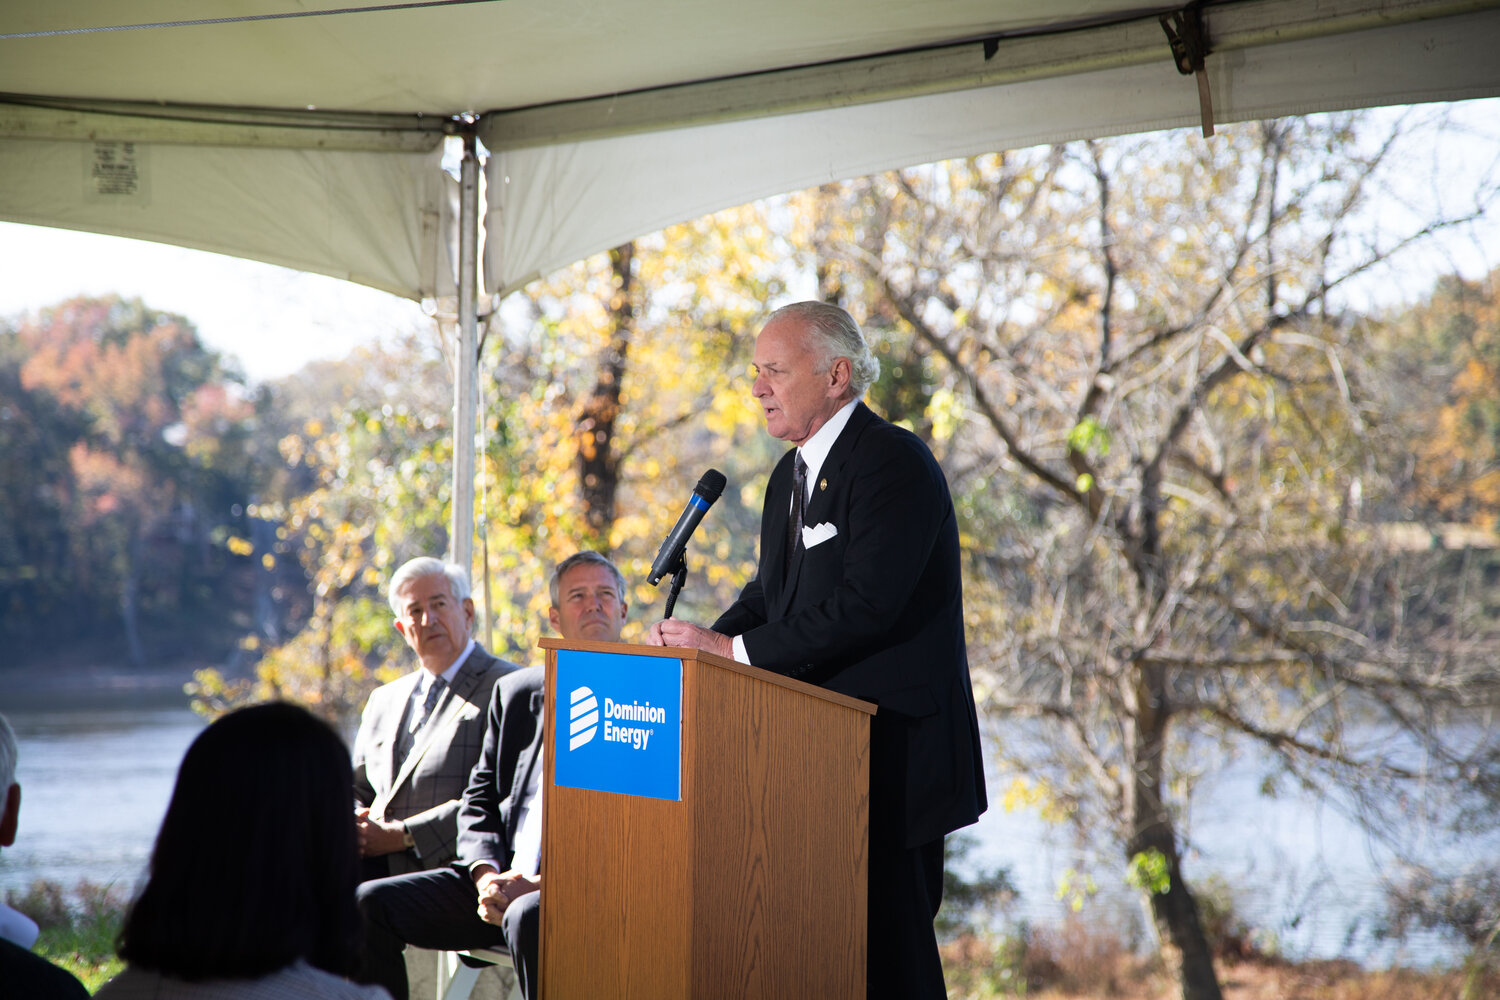 Gov. Henry McMaster spoke at a Nov. 13 event marking the completion of coal tar clean-up operations in the Congaree River.